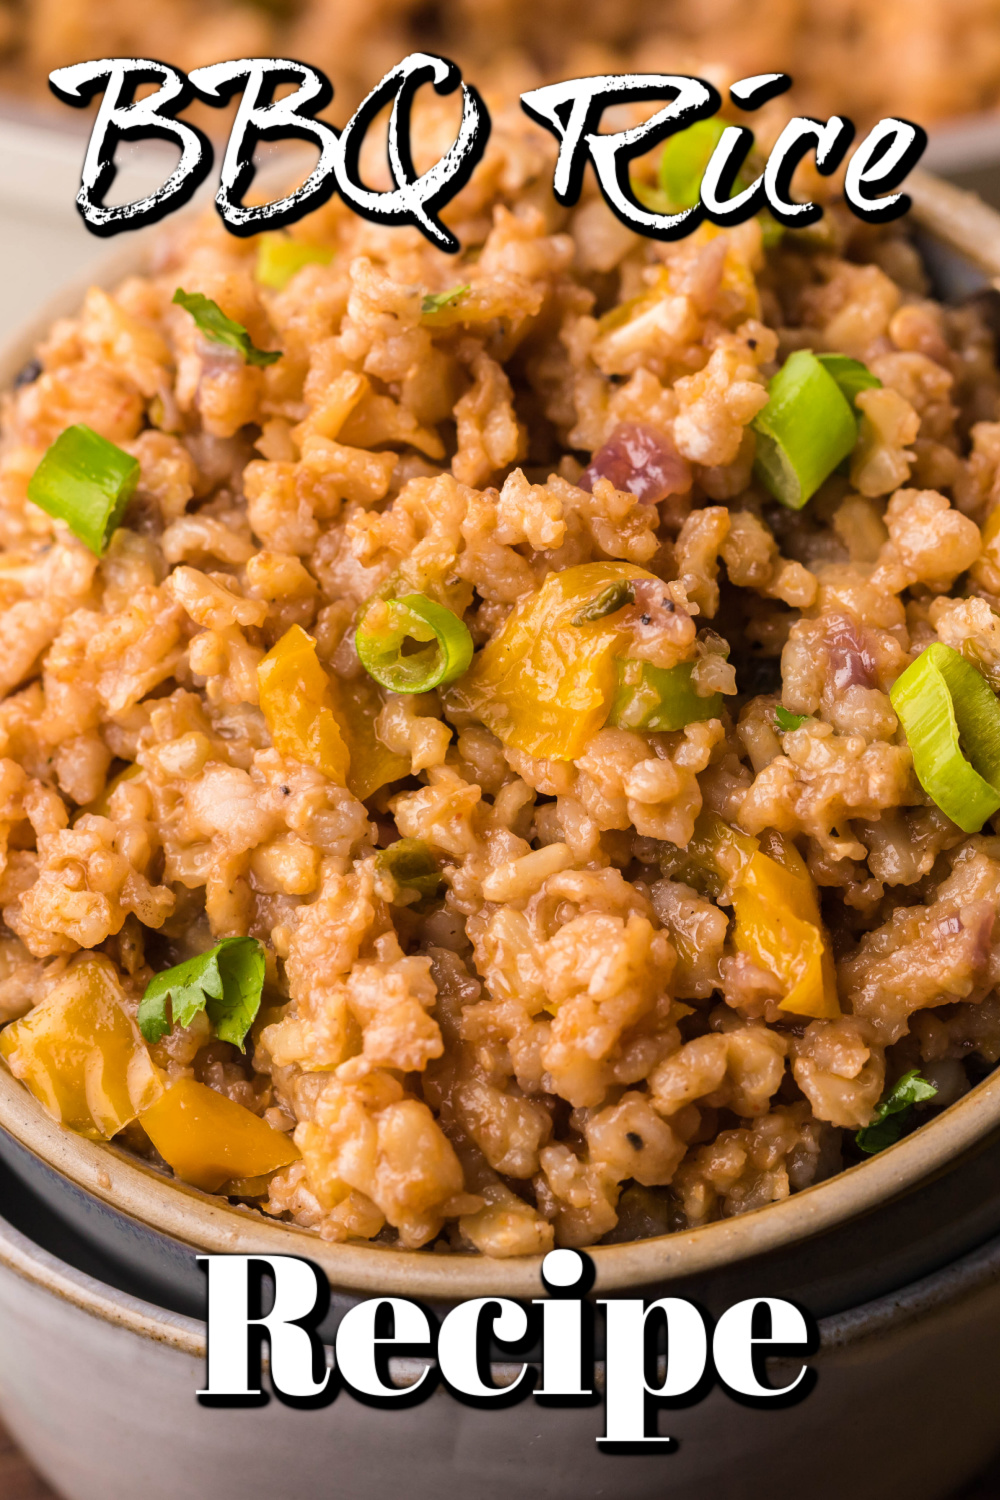 Looking for a great side dish, look no further than this amazing BBQ rice recipe. Using brown rice really adds a wonderful flavor to this dish!